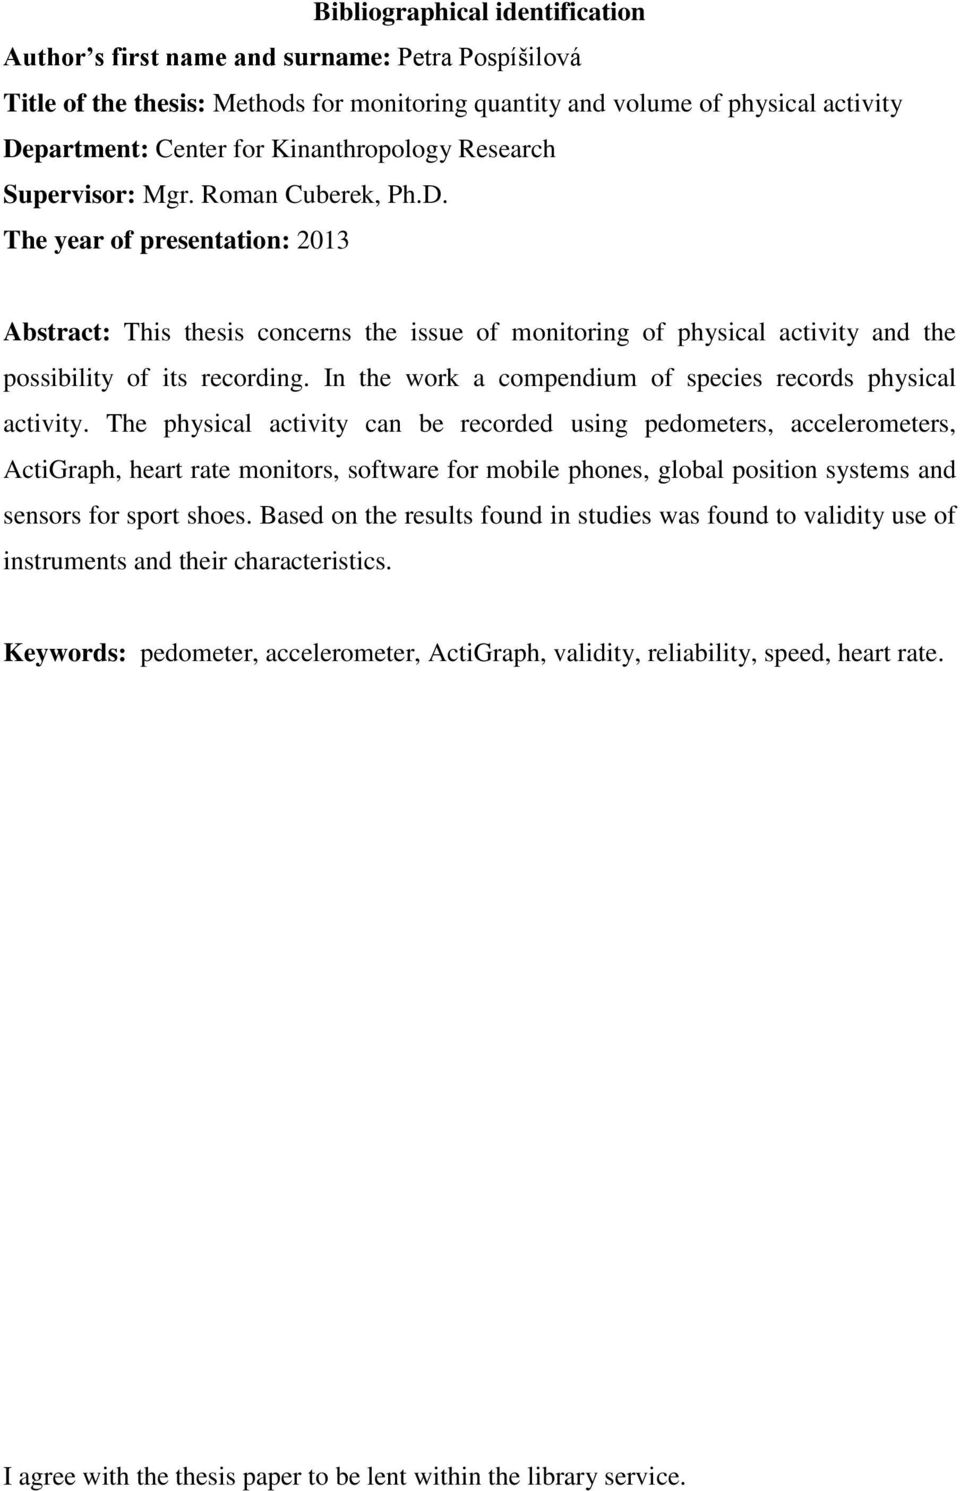 The year of presentation: 2013 Abstract: This thesis concerns the issue of monitoring of physical activity and the possibility of its recording.